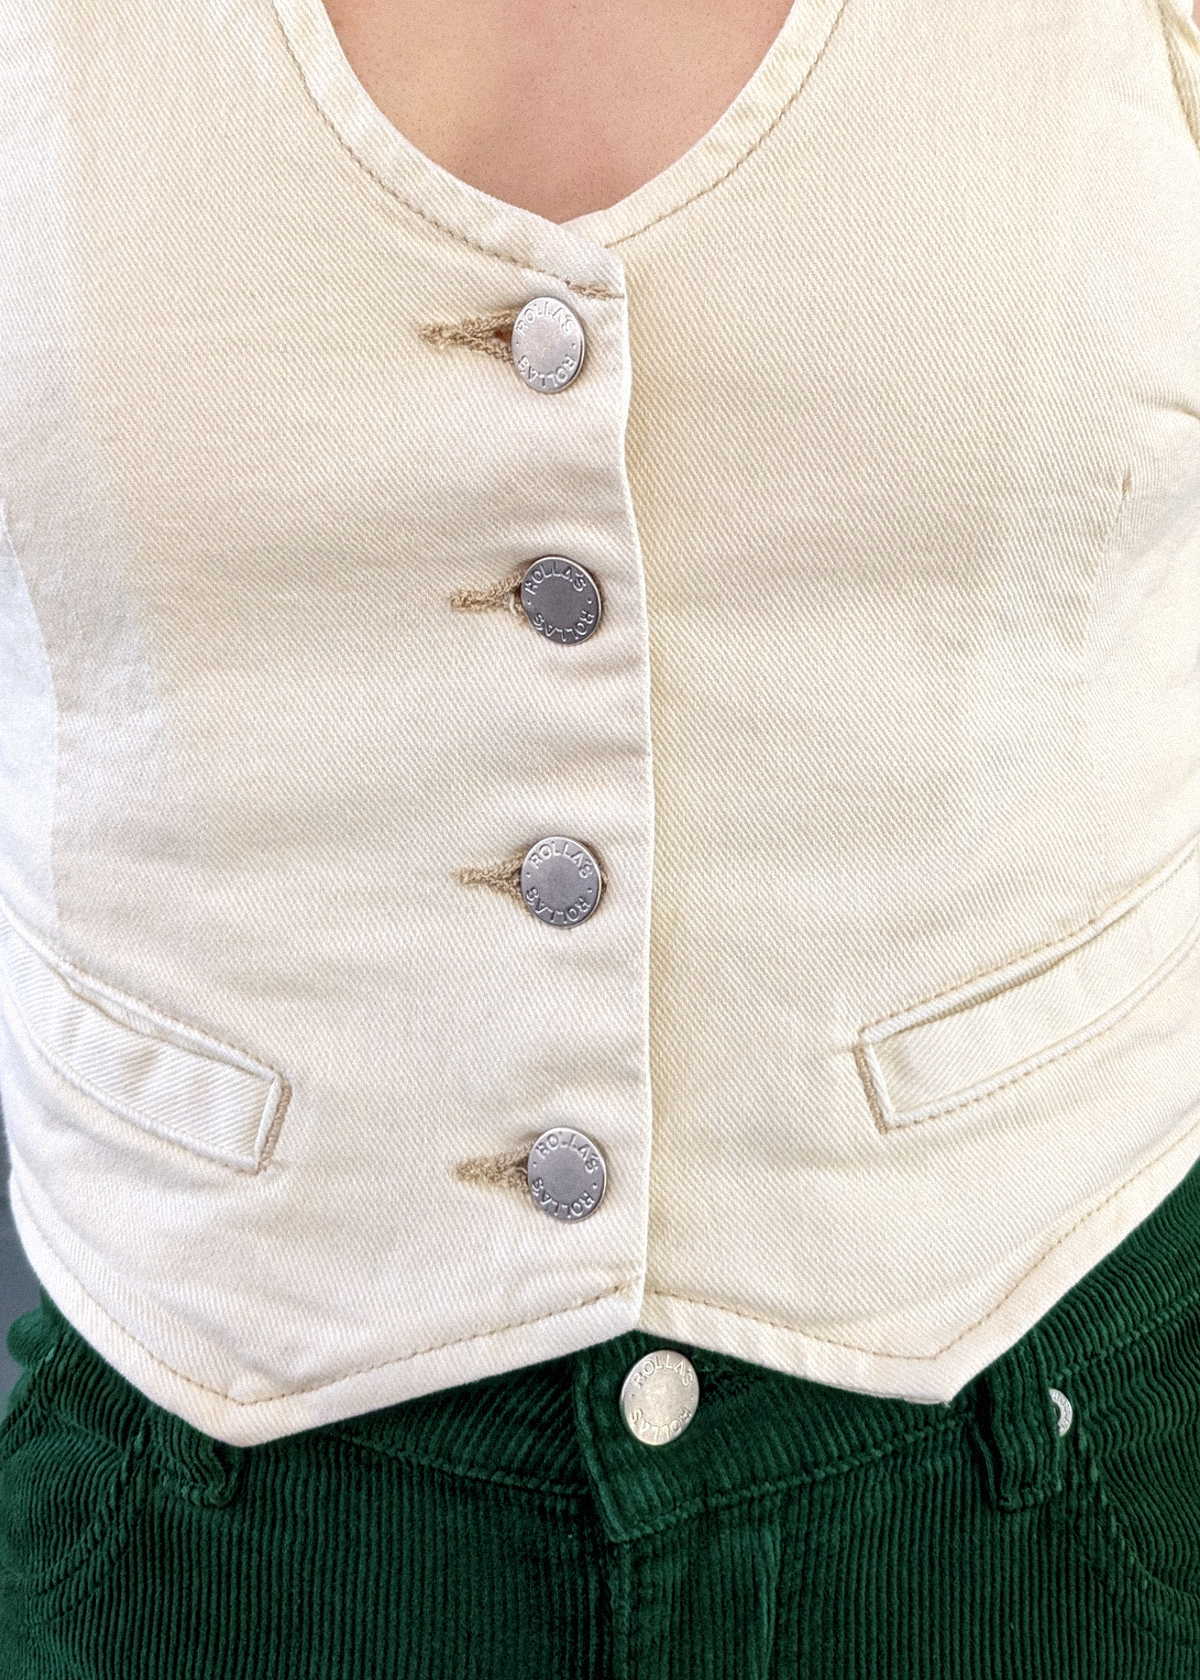 70s 80s inspired Rolla's Jeans Denim Dallas Vest in Buttercream Ivory. V-neckline, button front, and adjustable buckle at back.